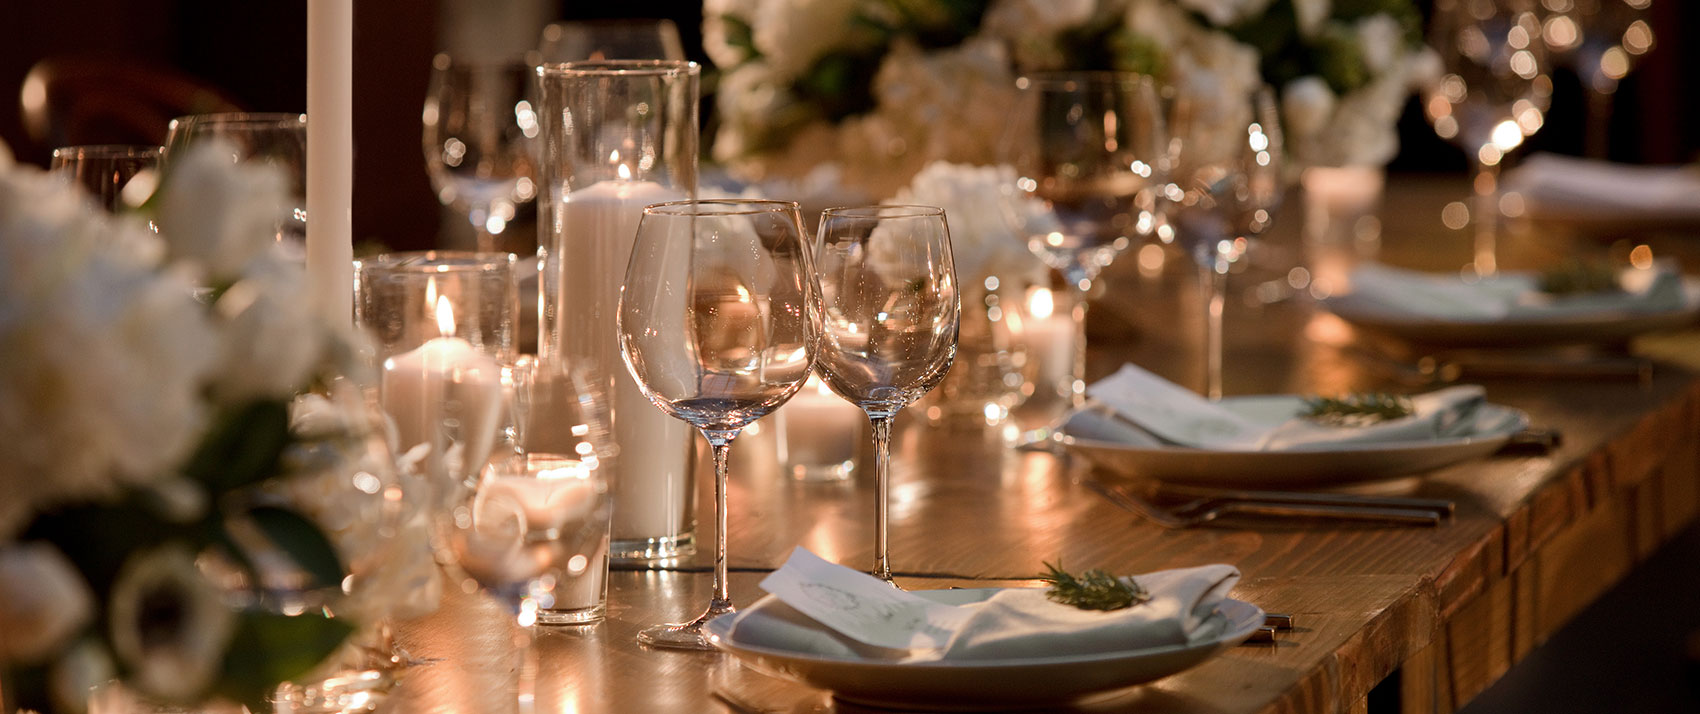 wedding reception table with candles